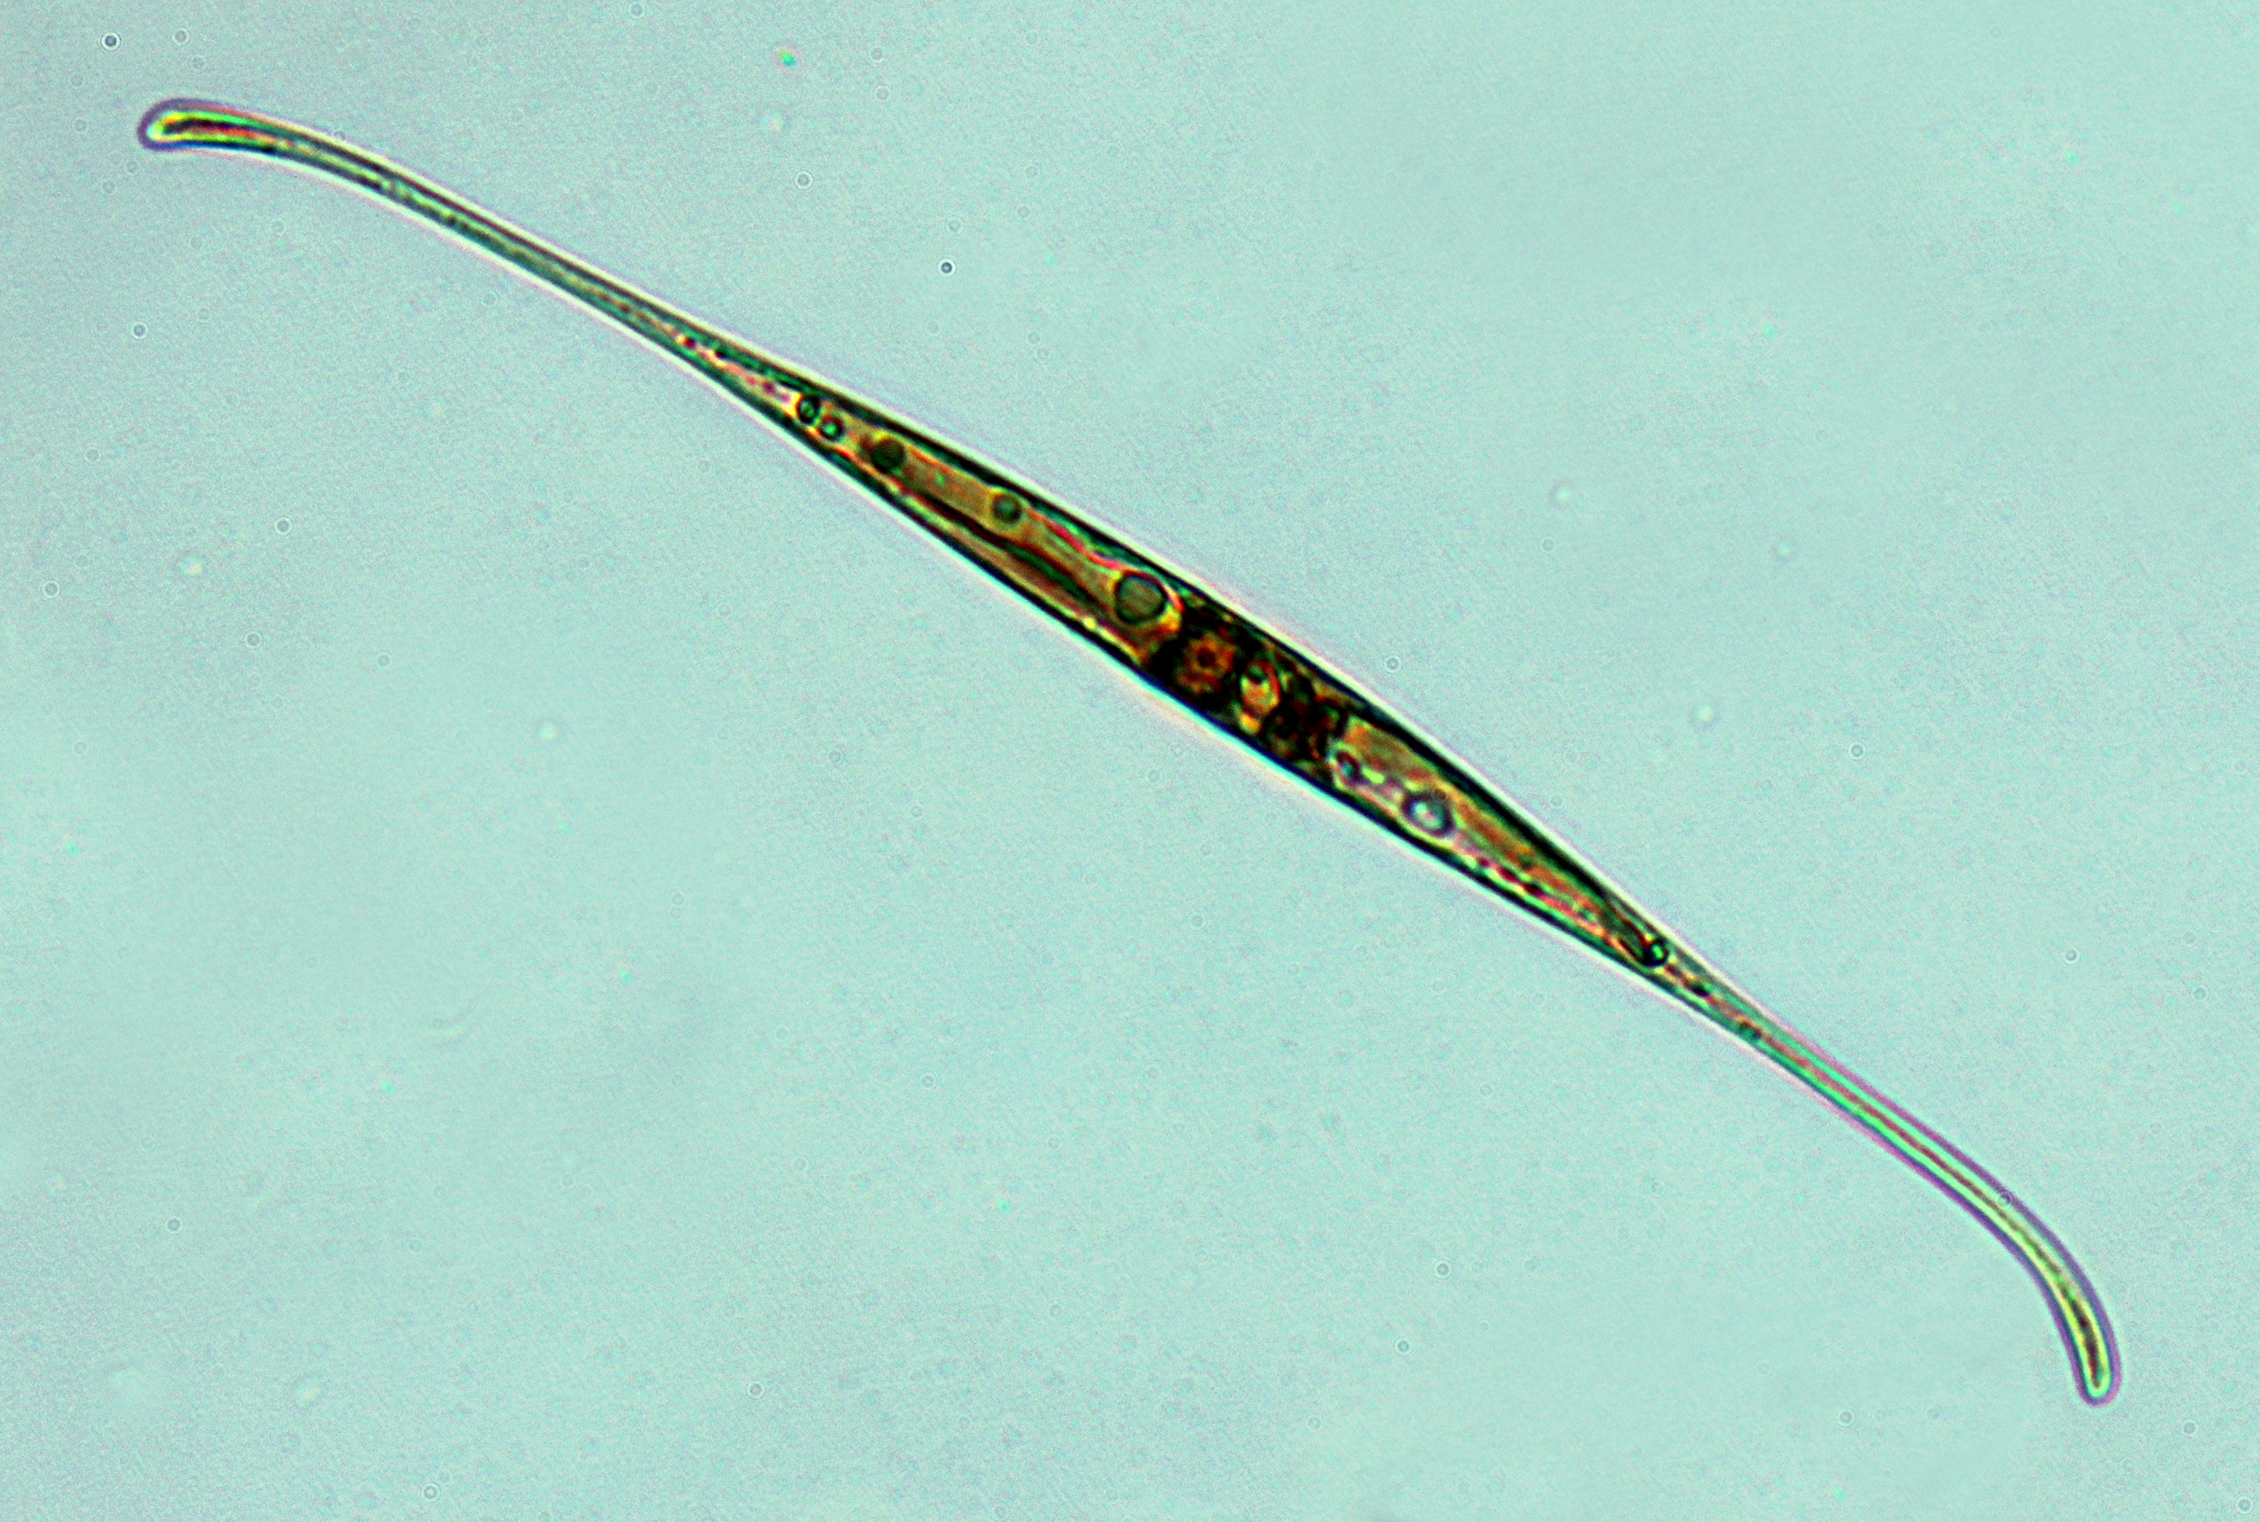 Cylindrotheca closterium